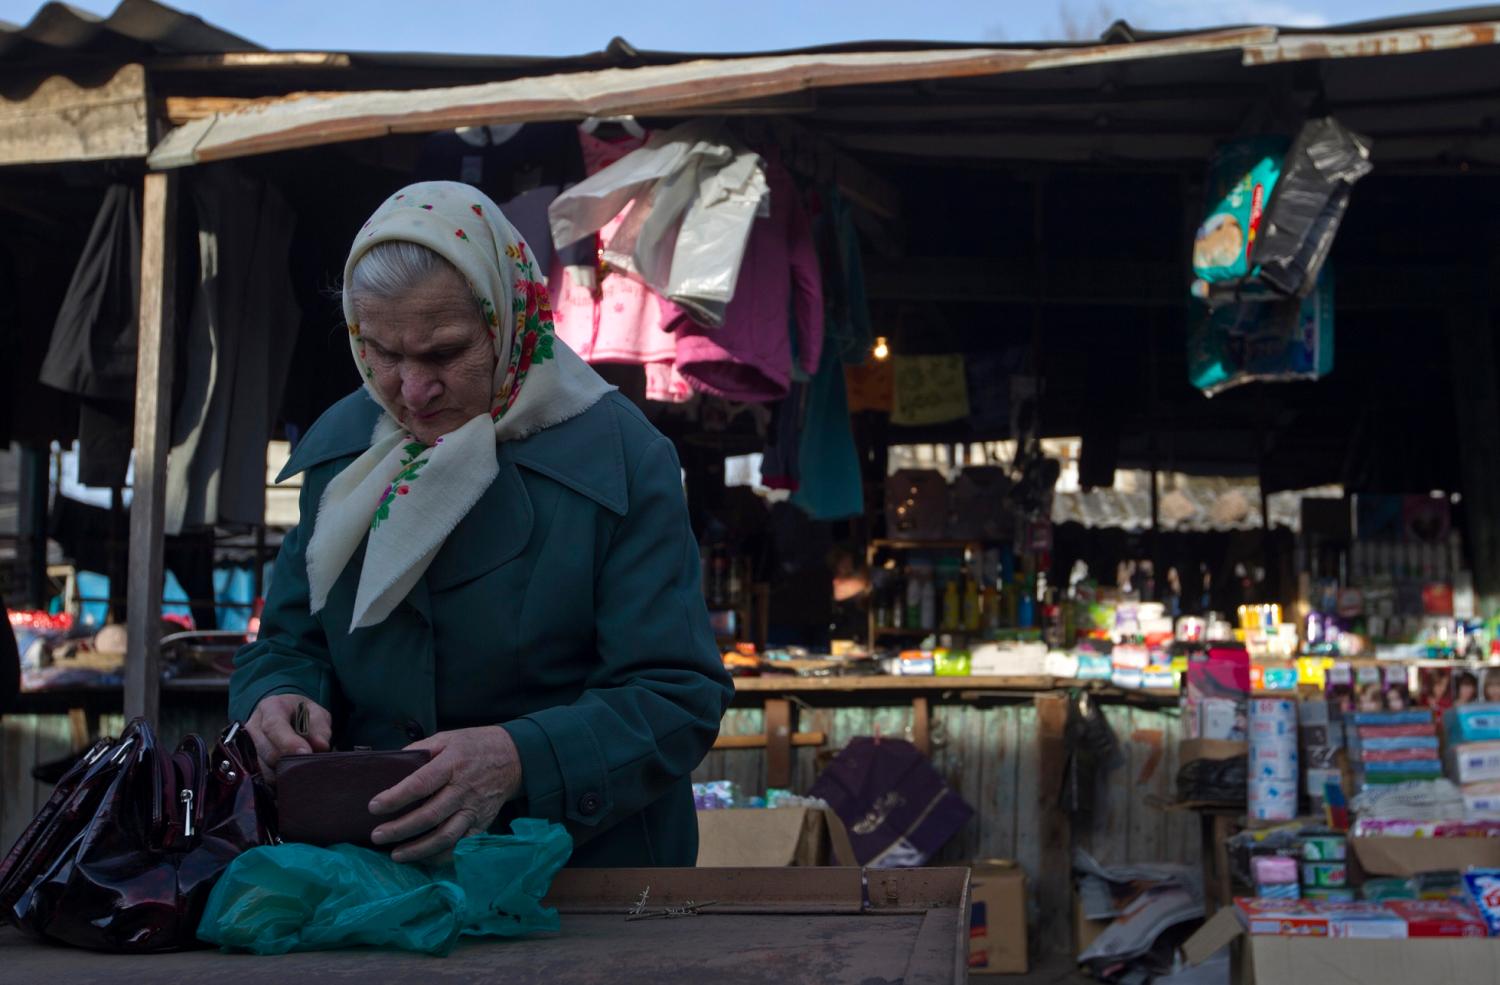 An elderly woman counts money at a market in the town of Tkvarcheli, some 50 km (31 miles) southeast of Sukhumi, the capital of Georgia's breakaway region of Abkhazia December 27, 2013. The territory of Abkhazia is located several miles southwest of the border with Russia and the Olympic Park in the Adler district of the Black Sea resort city of Sochi which will host the 2014 Winter Olympic Games in February. Abkhaz separatists fought Georgian government forces in 1992-1993, after which the breakaway region declared independence. Russia, Nicaragua, Venezuela, Nauru, Vanuatu and Tuvalu recognized Abkhazia as an independent state while all other countries regard it as a Georgian province, according to local media. Picture taken December 27, 2013. REUTERS/Maxim Shemetov (GEORGIA  - Tags: SOCIETY POLITICS OLYMPICS SPORT) - GM1EA161B4D01